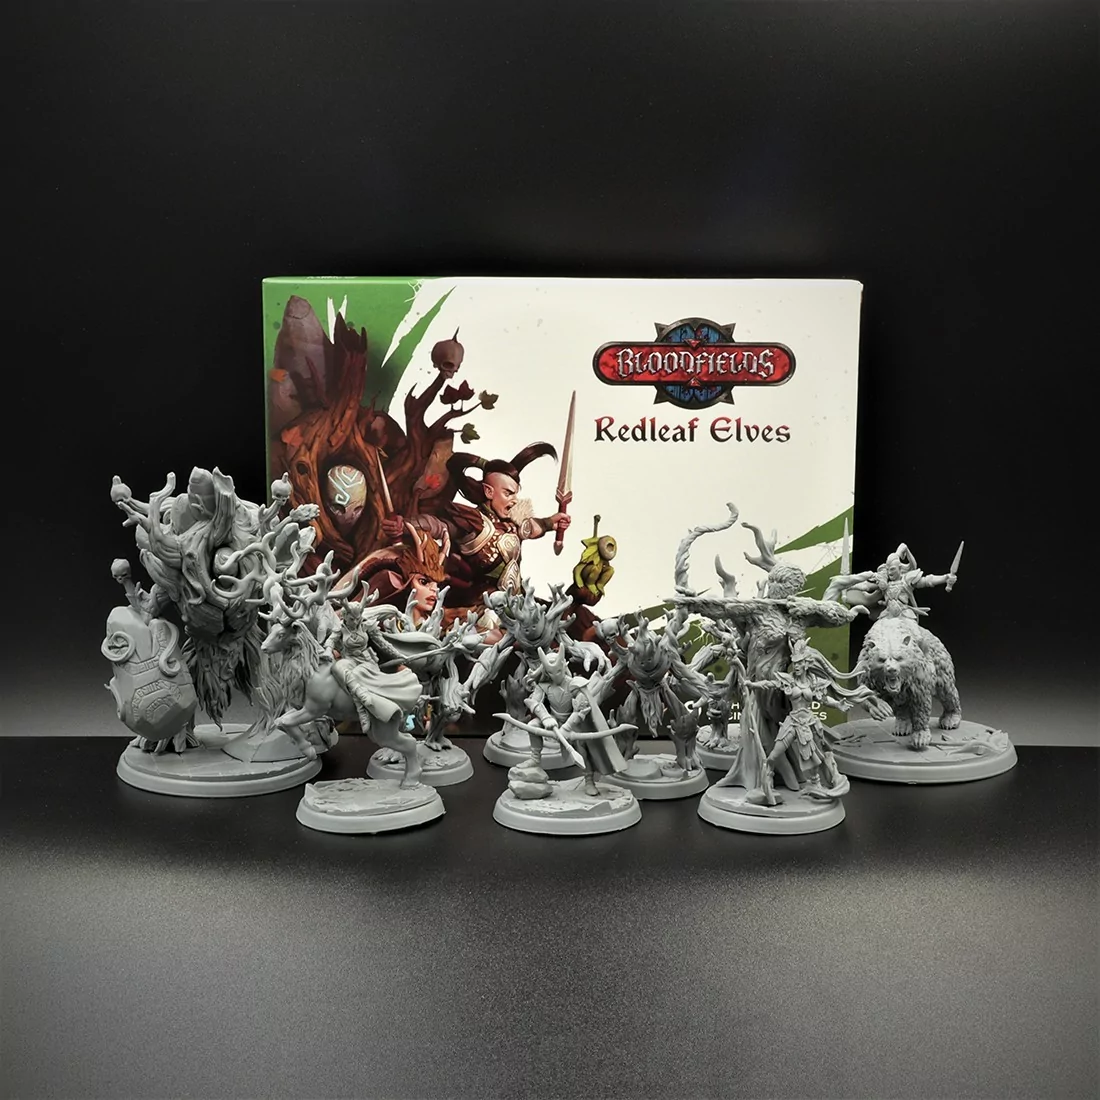 Army pack of fantasy miniatures Redleaf Elves - Bloodfields tabletop RPG game